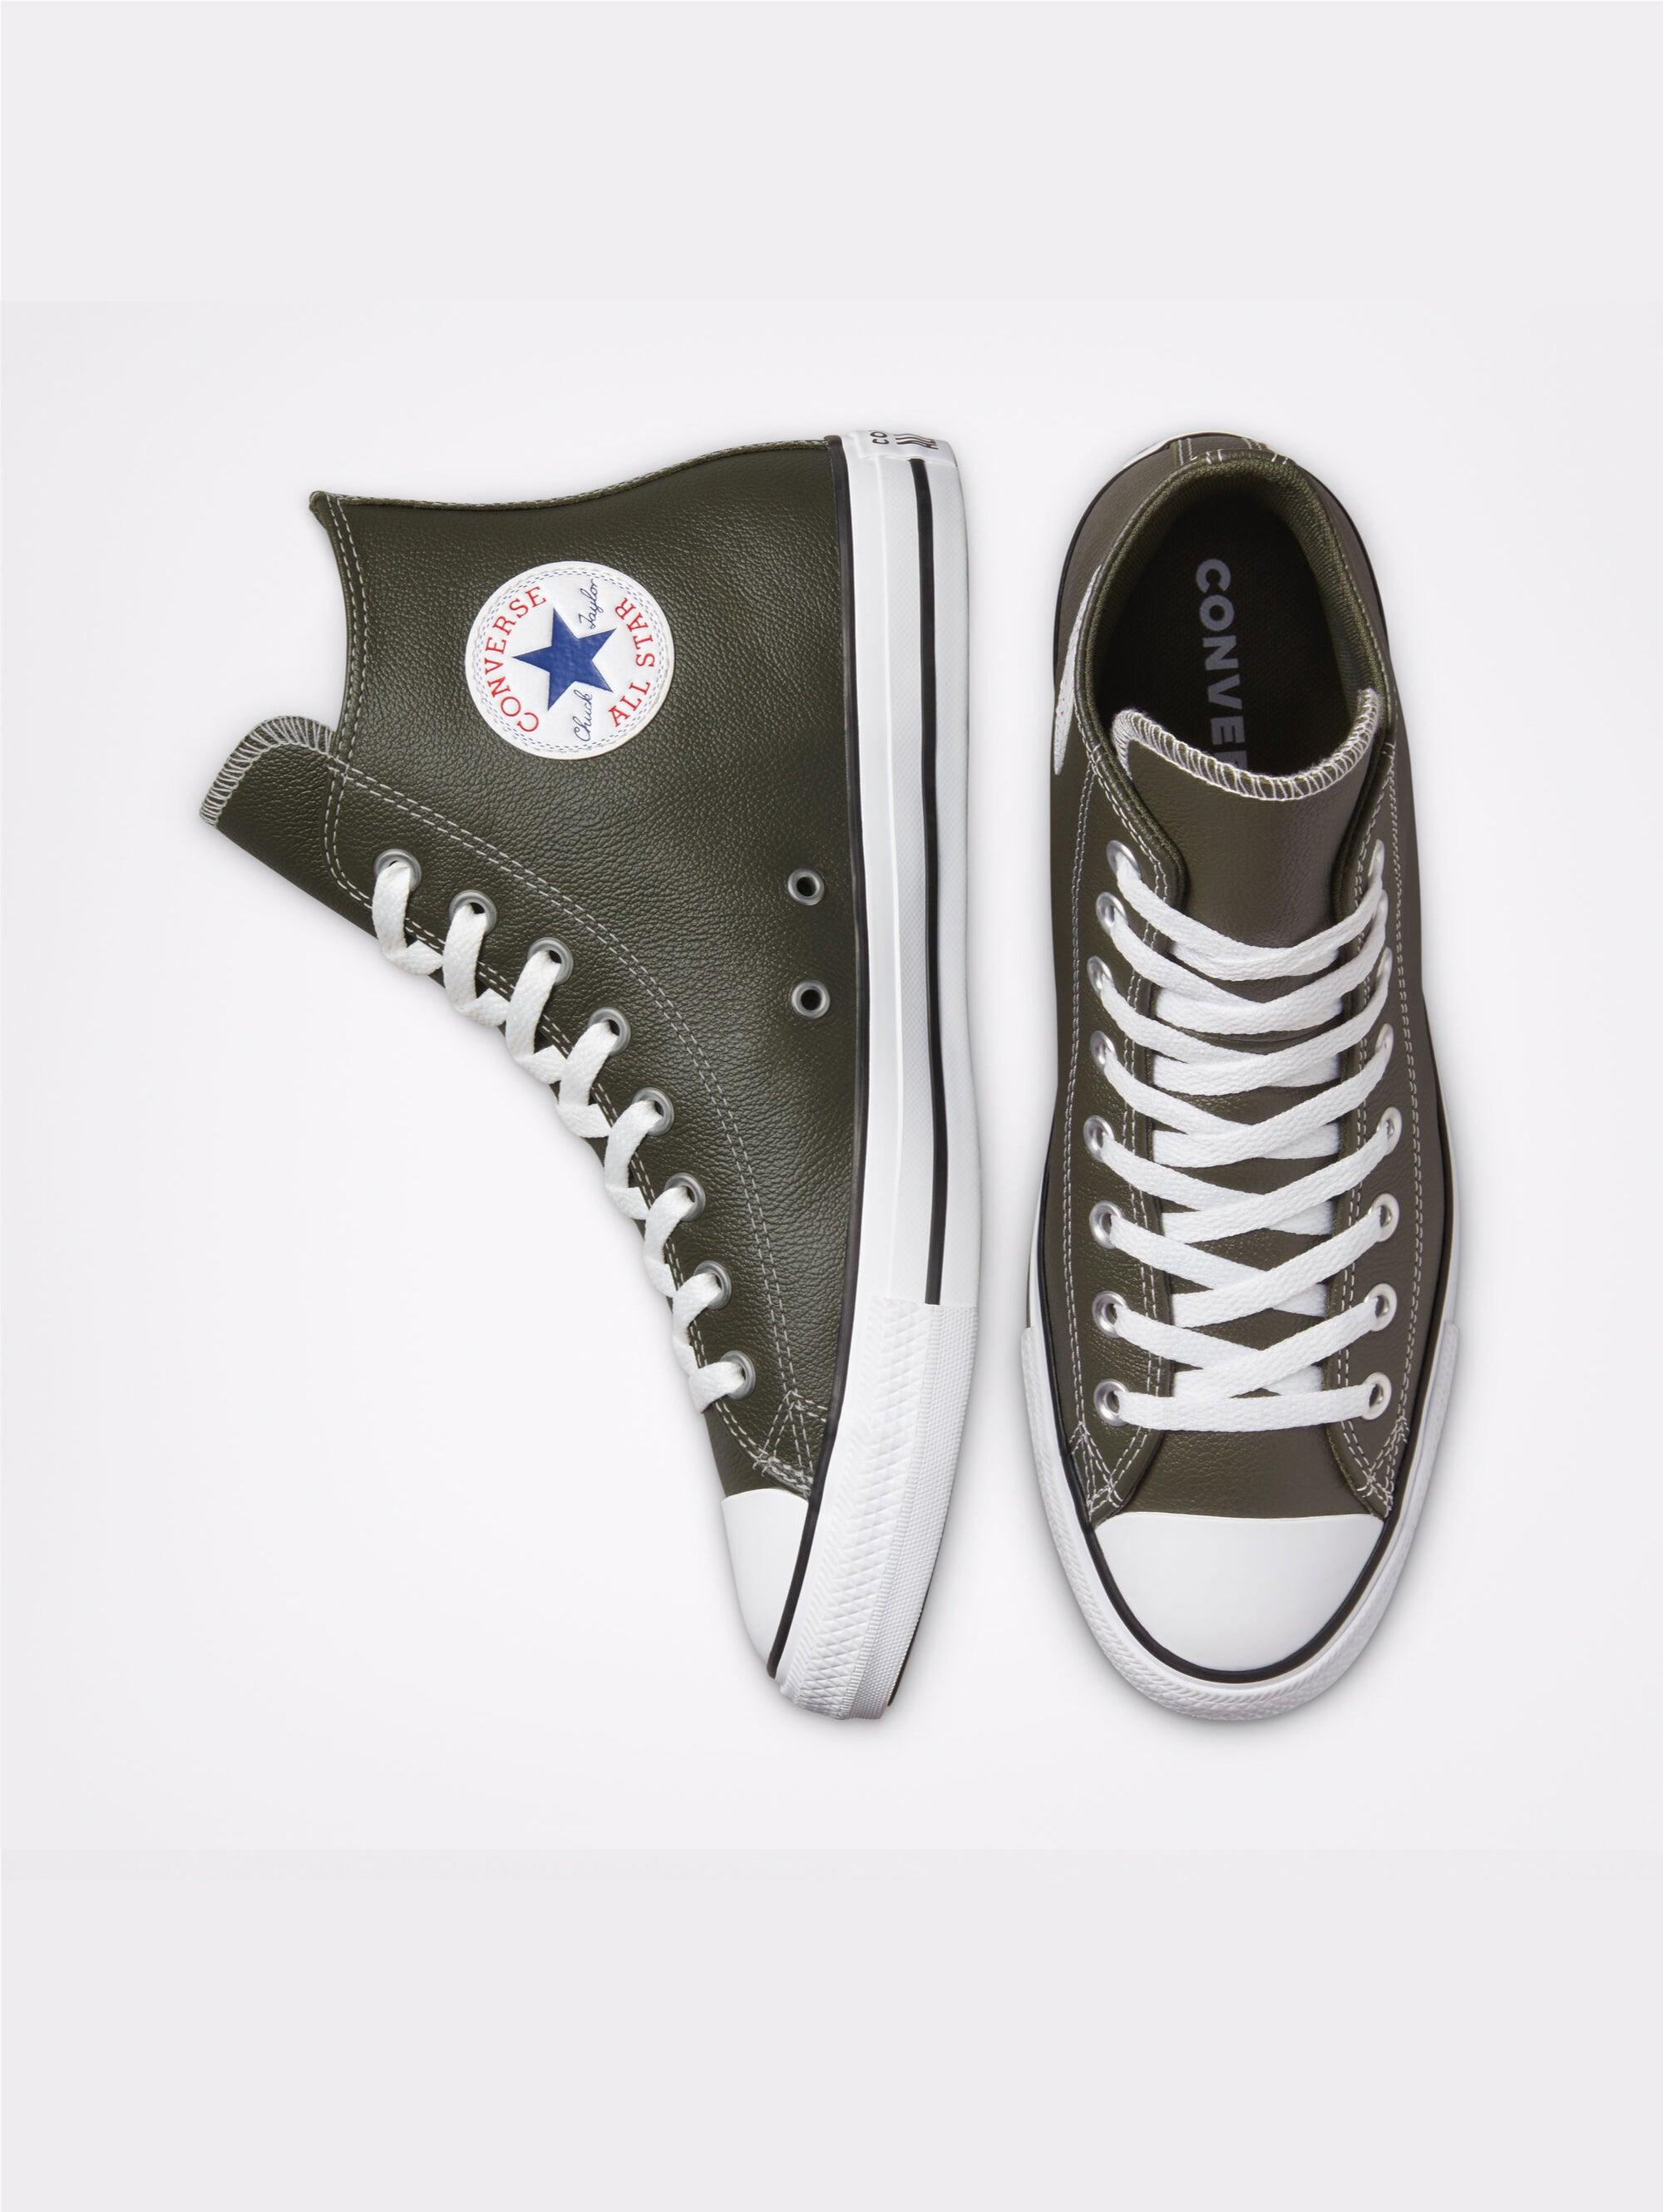 Green Hammered Leather Sneakers ديكور مطبخ